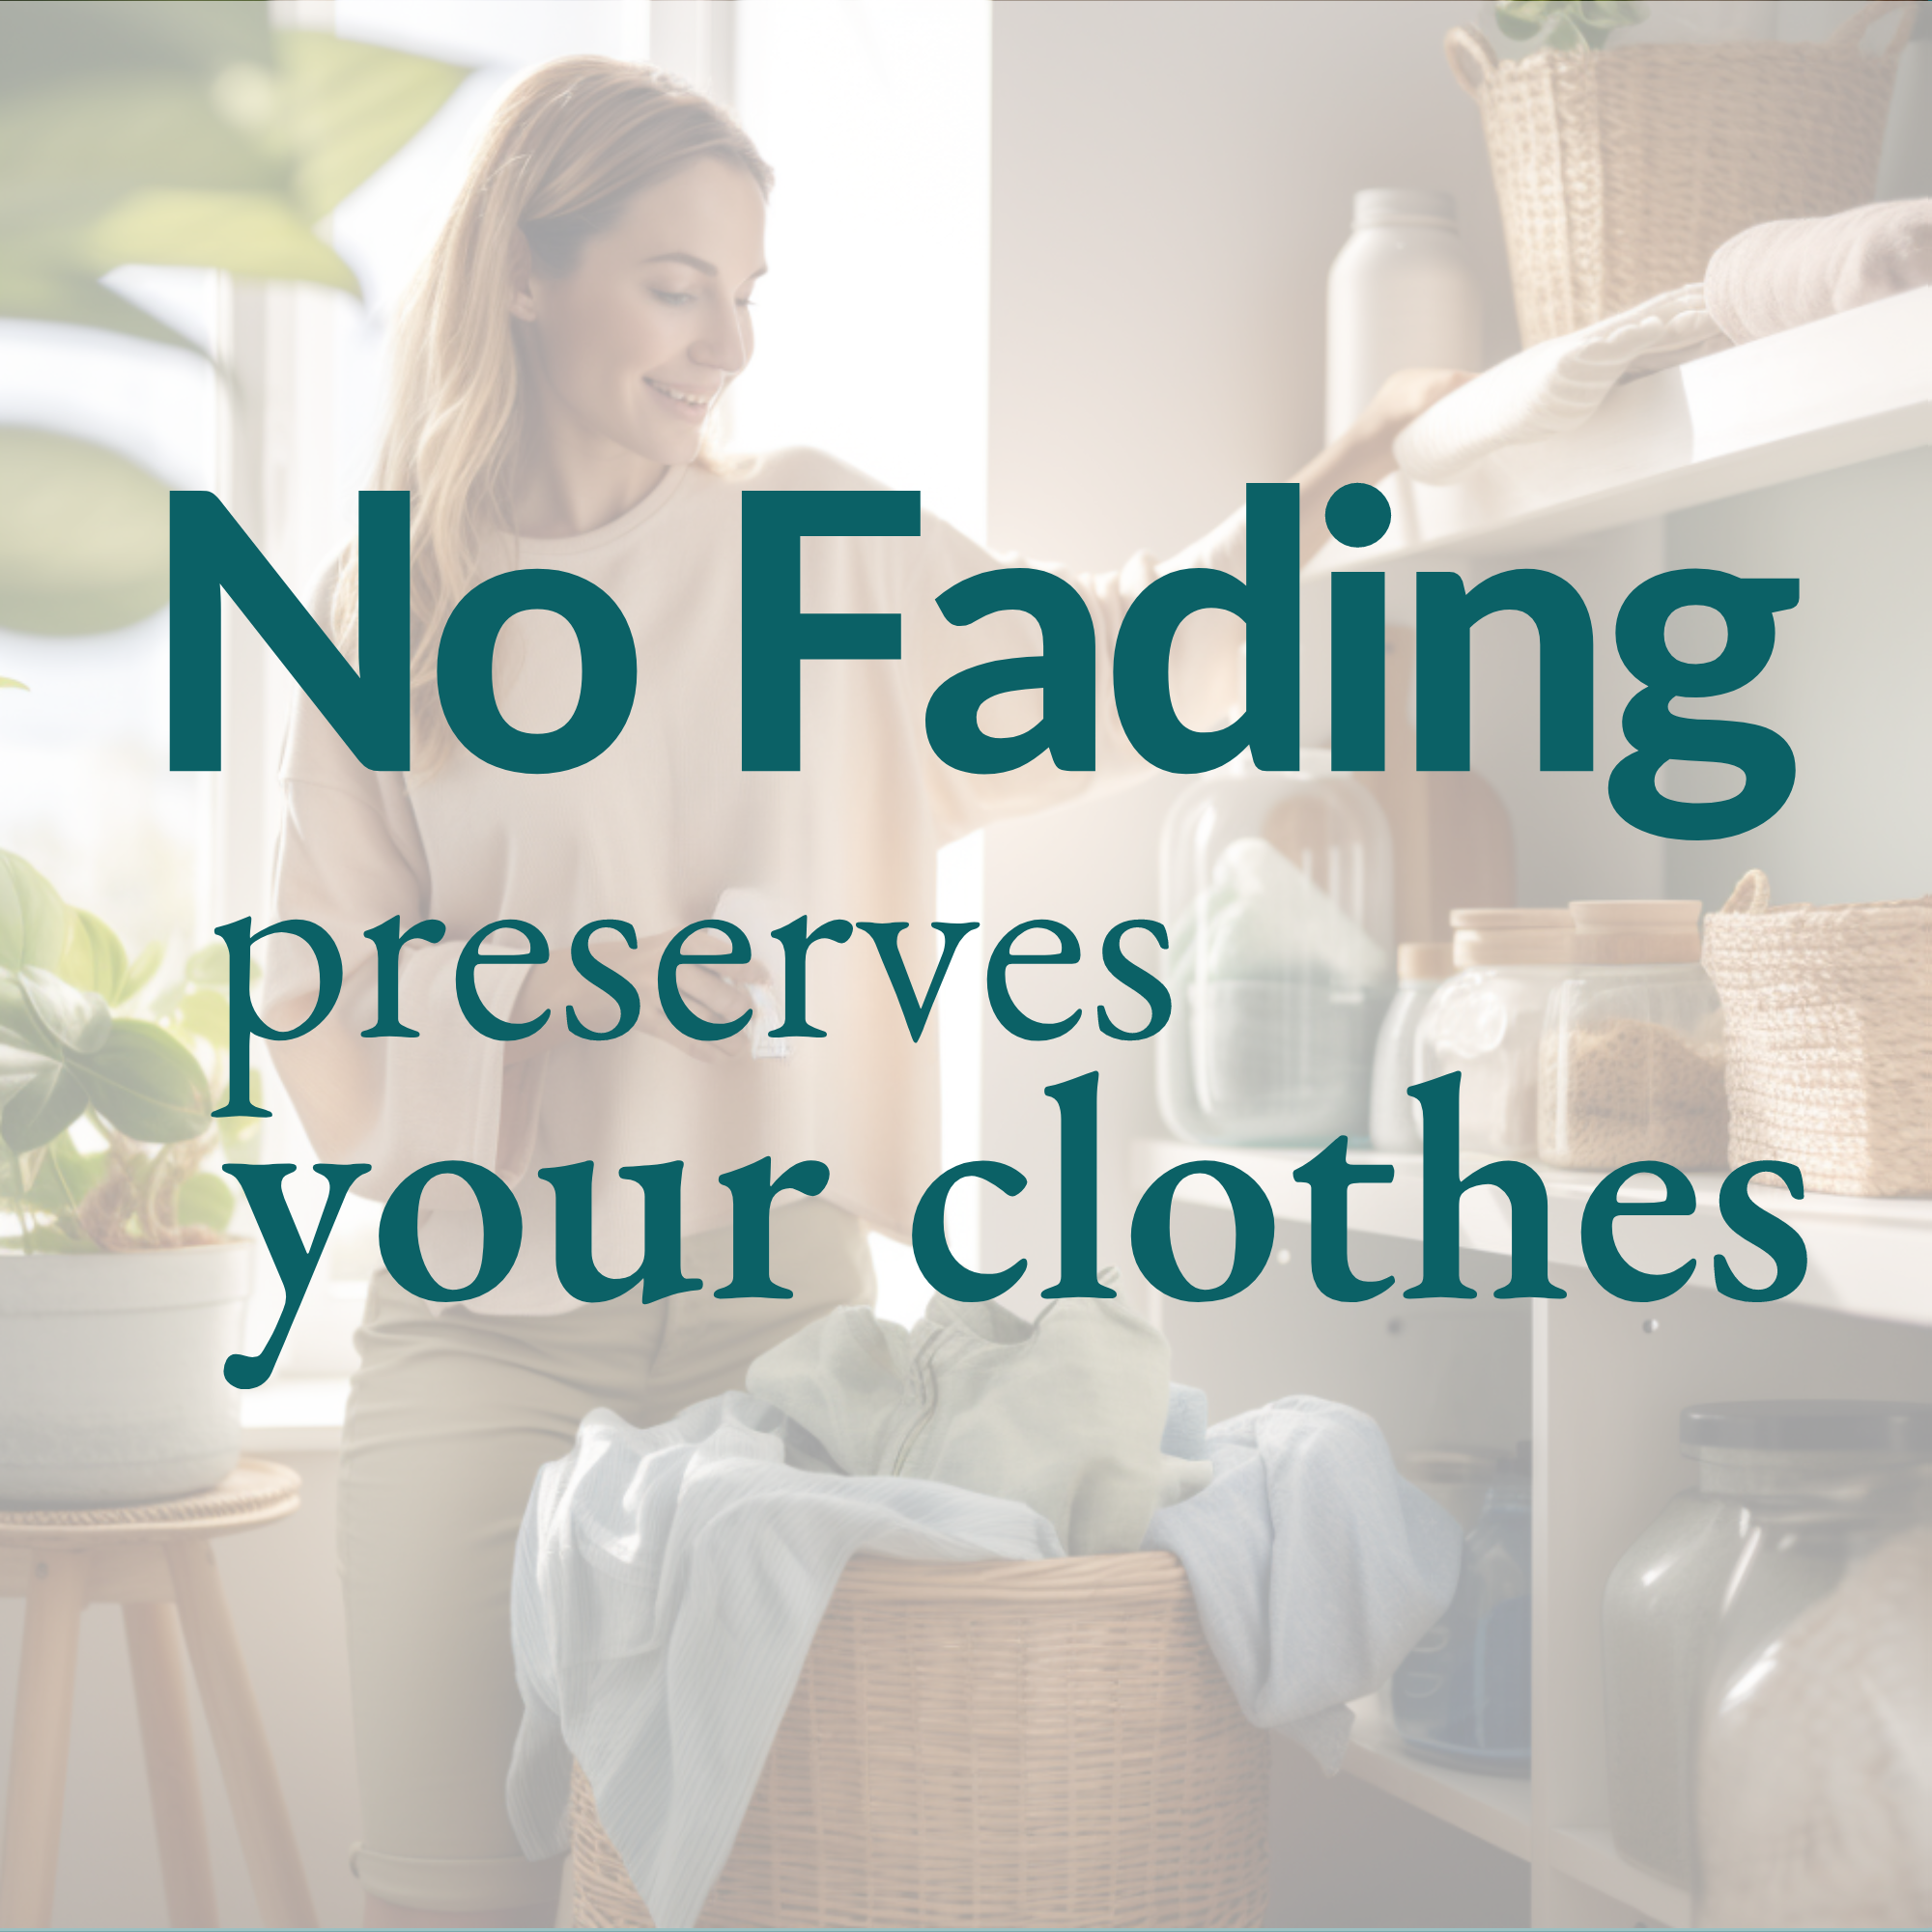 Laundle preserves your clothes with no fading